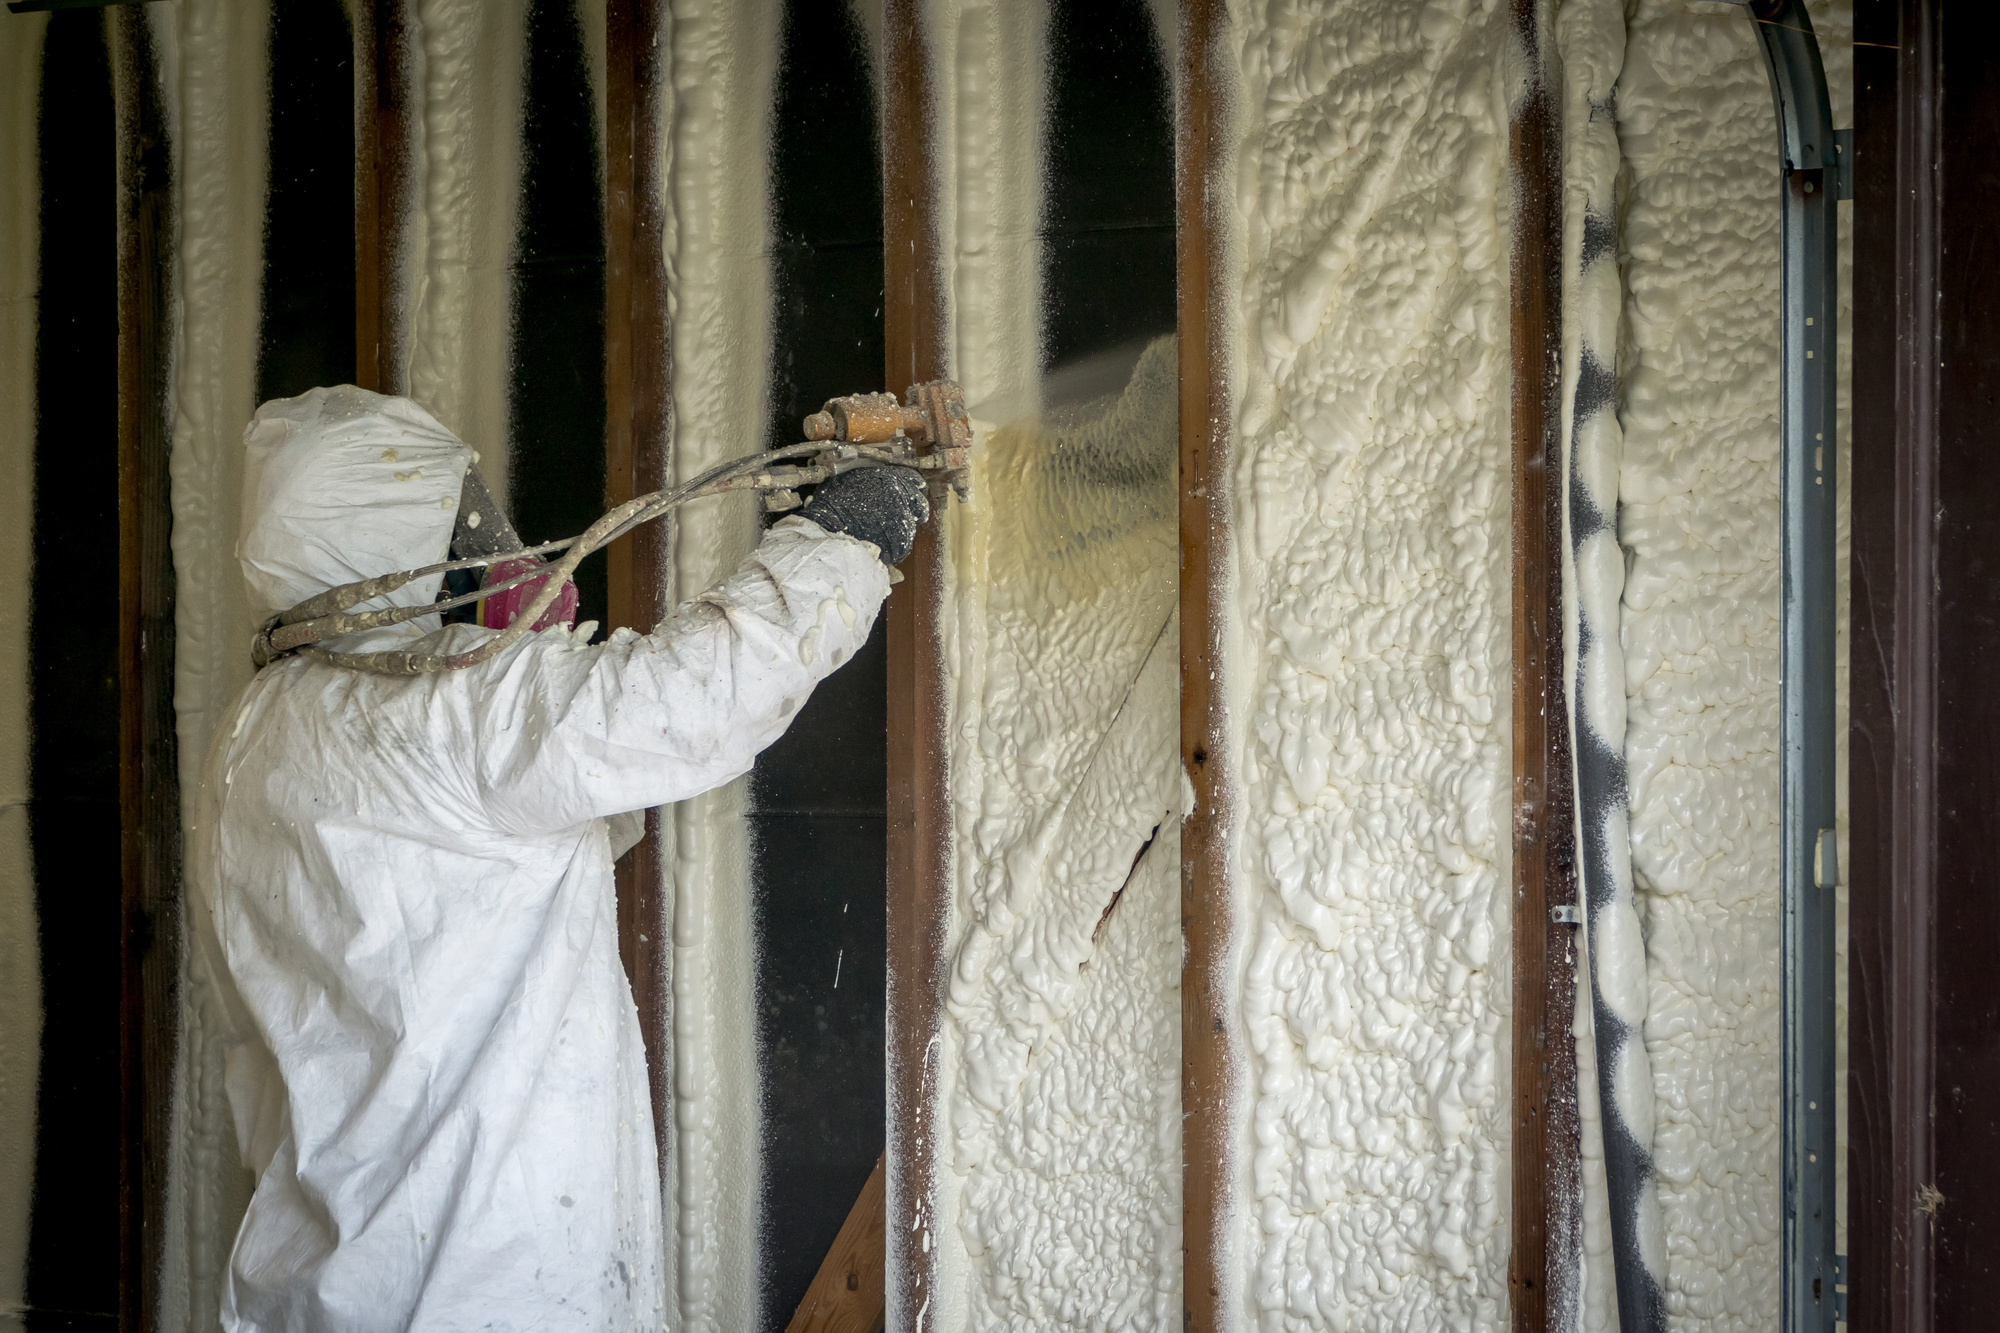 Home insulation is essential to help keep your home warm throughout the year. Here's what you need to know about home insulation.